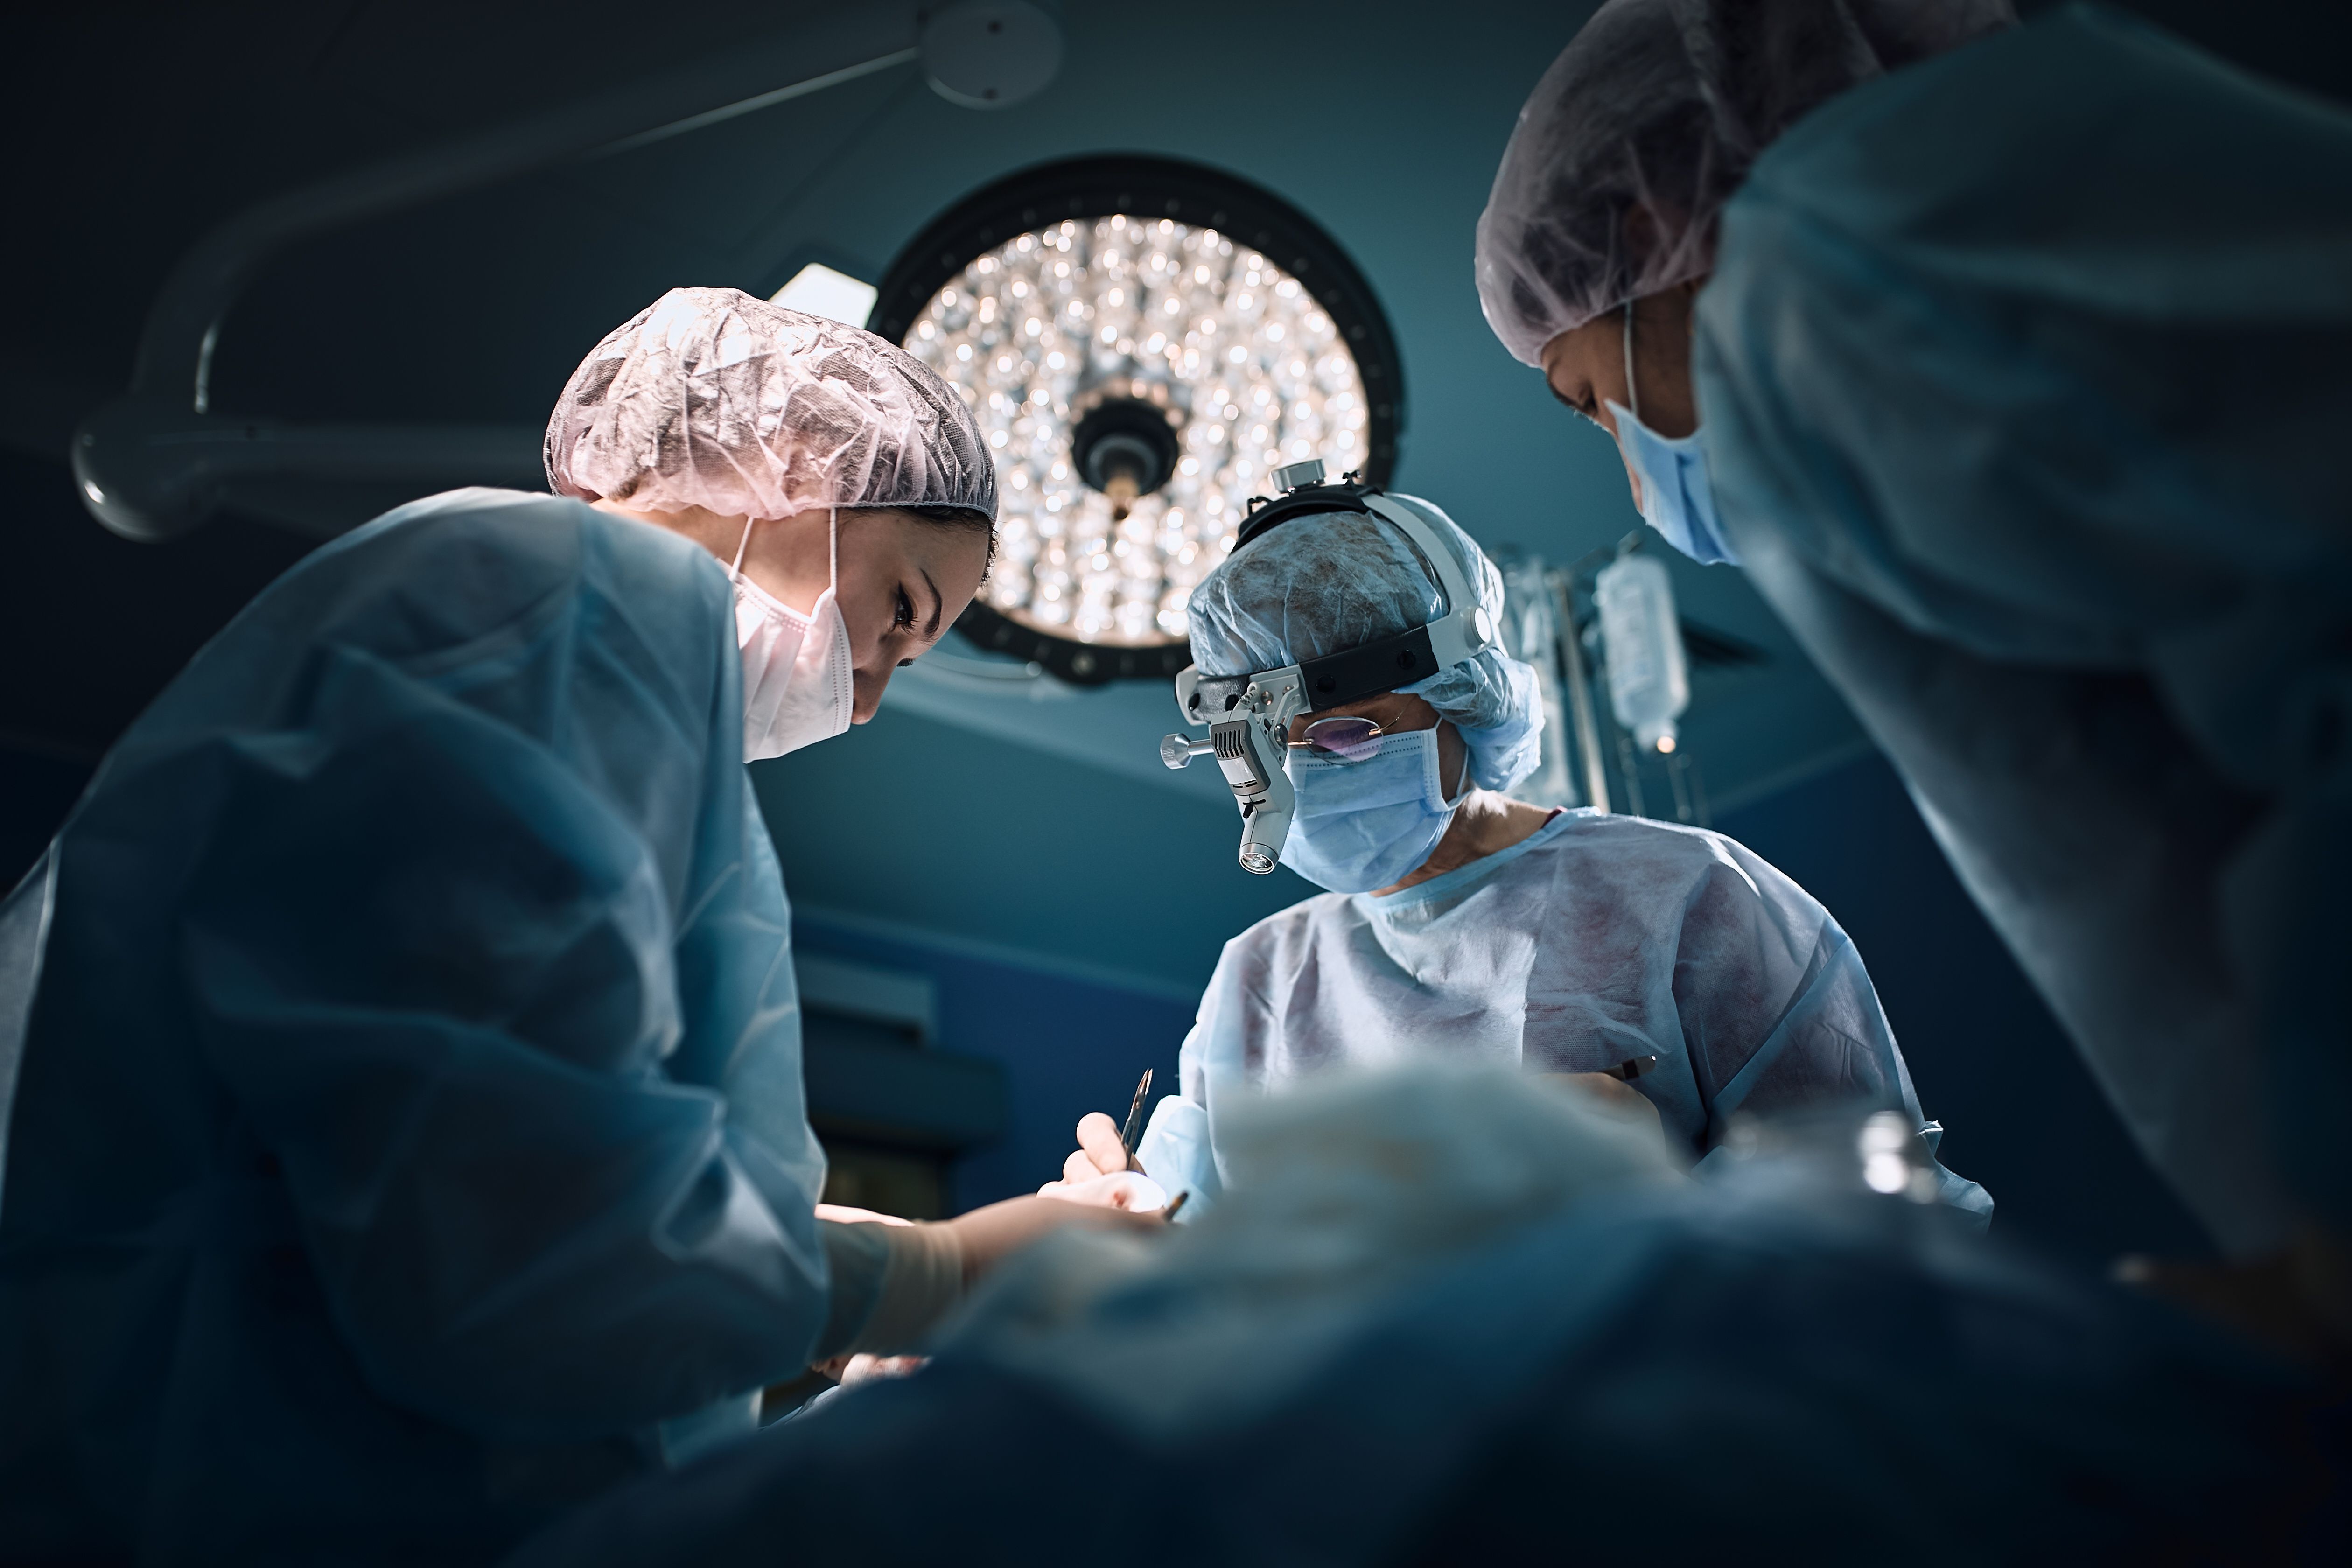 Illustrative photo of three surgeons in an operating room seen from a patient's point of view.